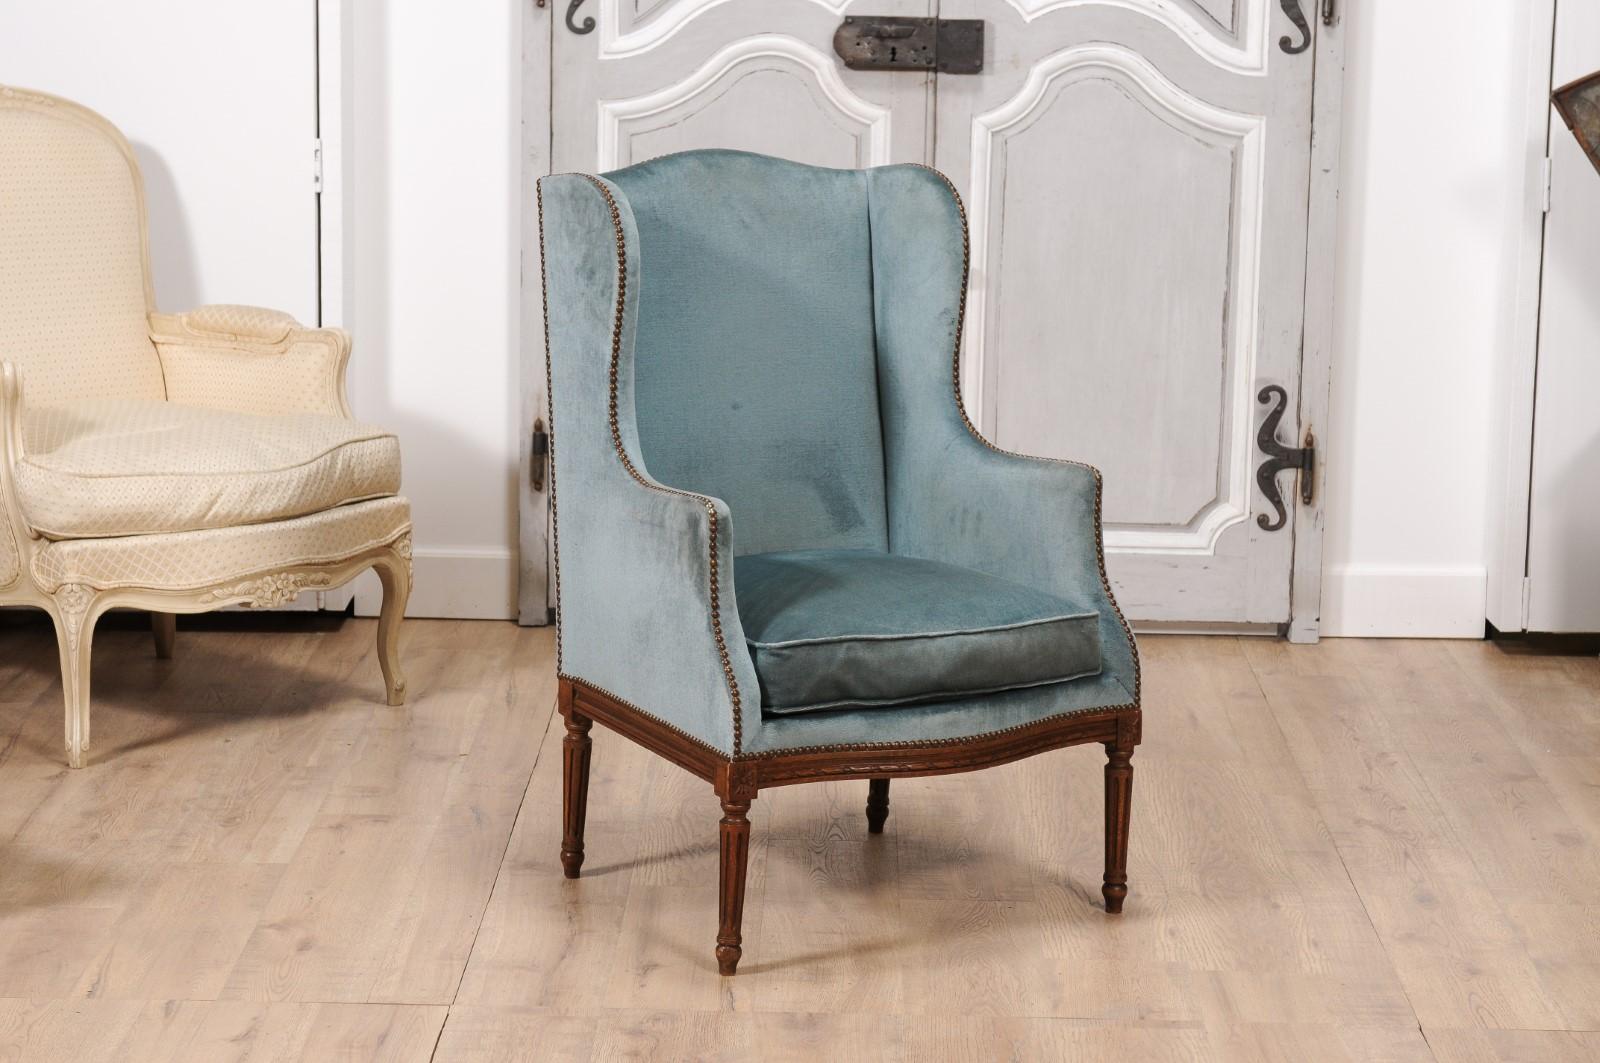 A French Louis XVI style walnut wingback bergère chair from the 19th century with turned fluted legs, carved rosettes on the front knees, twisted rope motif on the apron and blue grey velvet upholstery. Dive into the opulence of 19th-century French